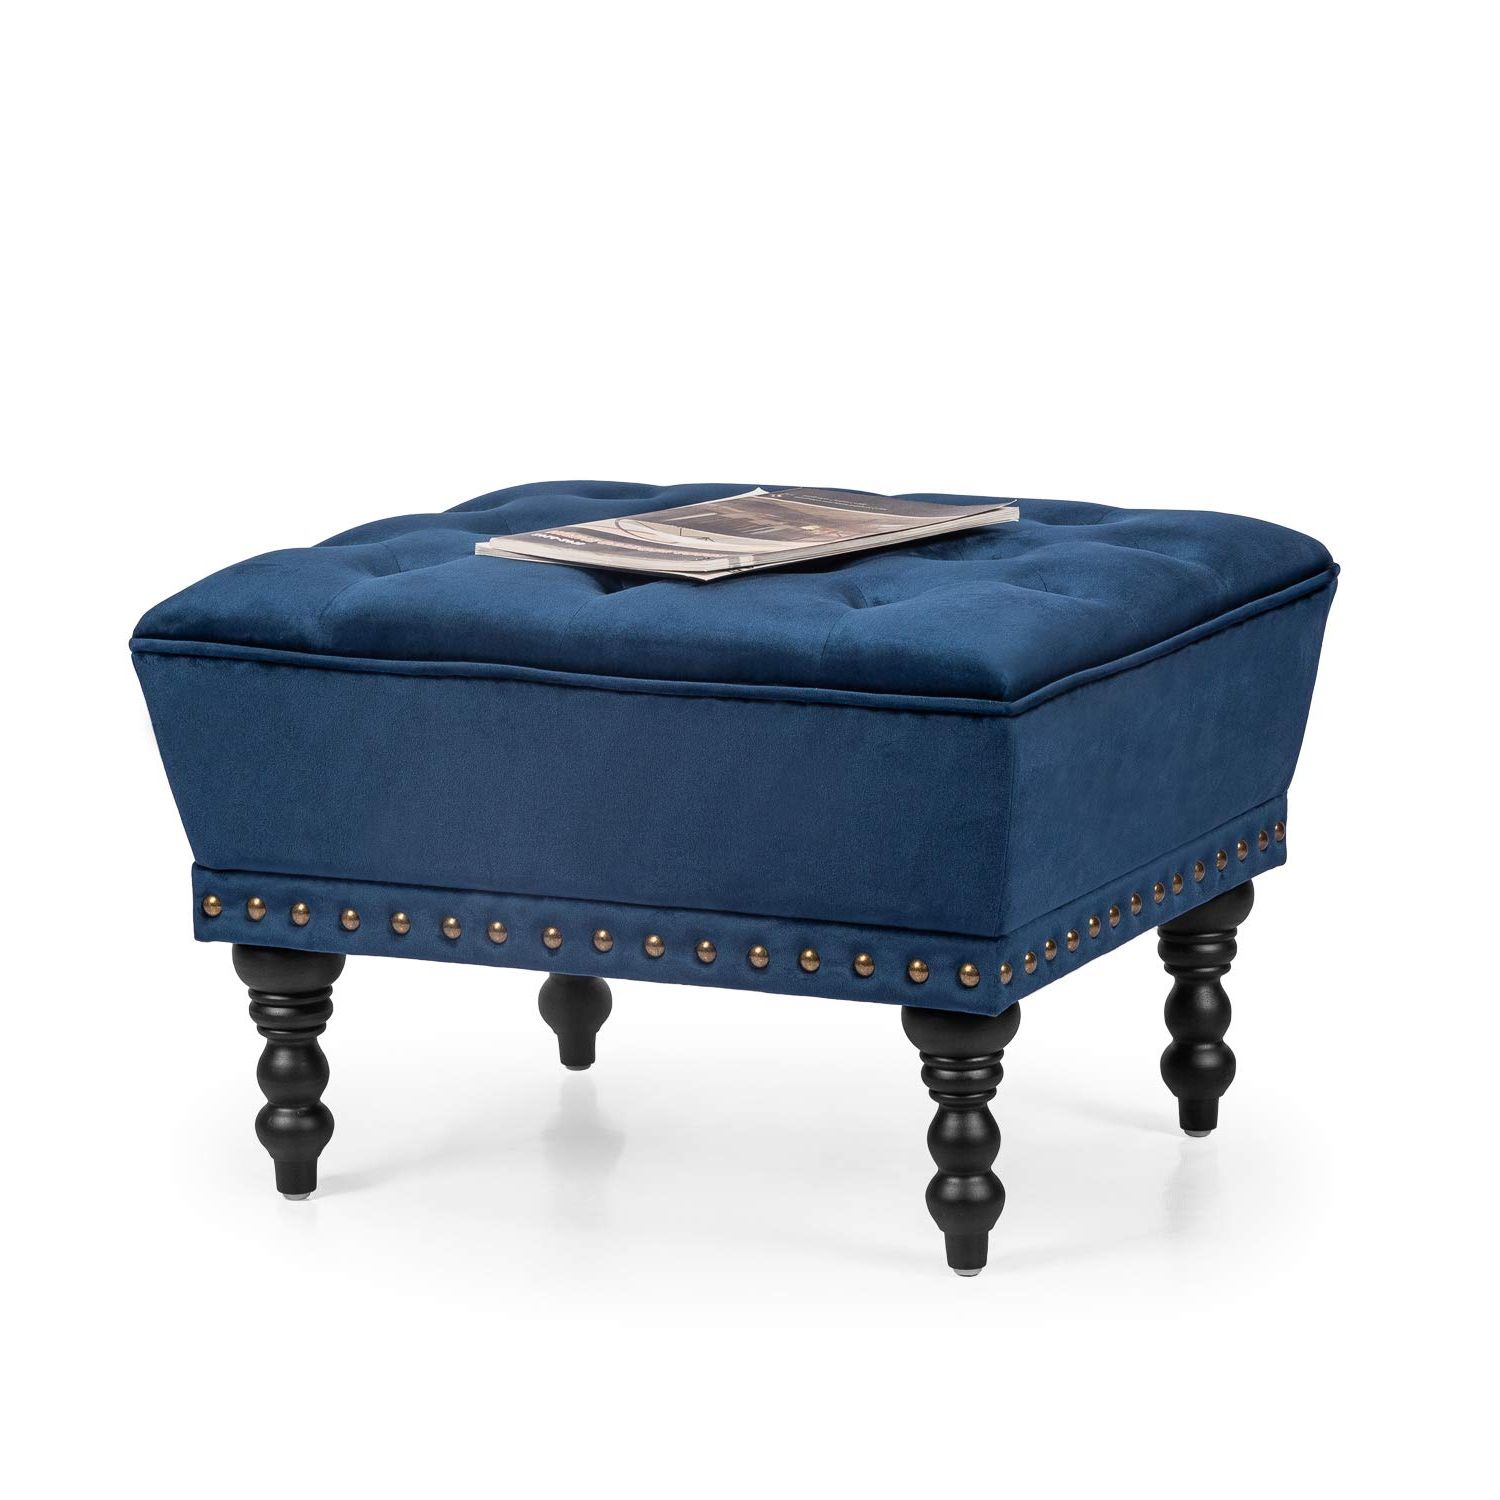 Homebeez Fabric Tufted Ottoman Foot Stool Footrest Navy Blue – Walmart Throughout Preferred Blue Slate Jute Pouf Ottomans (View 8 of 10)